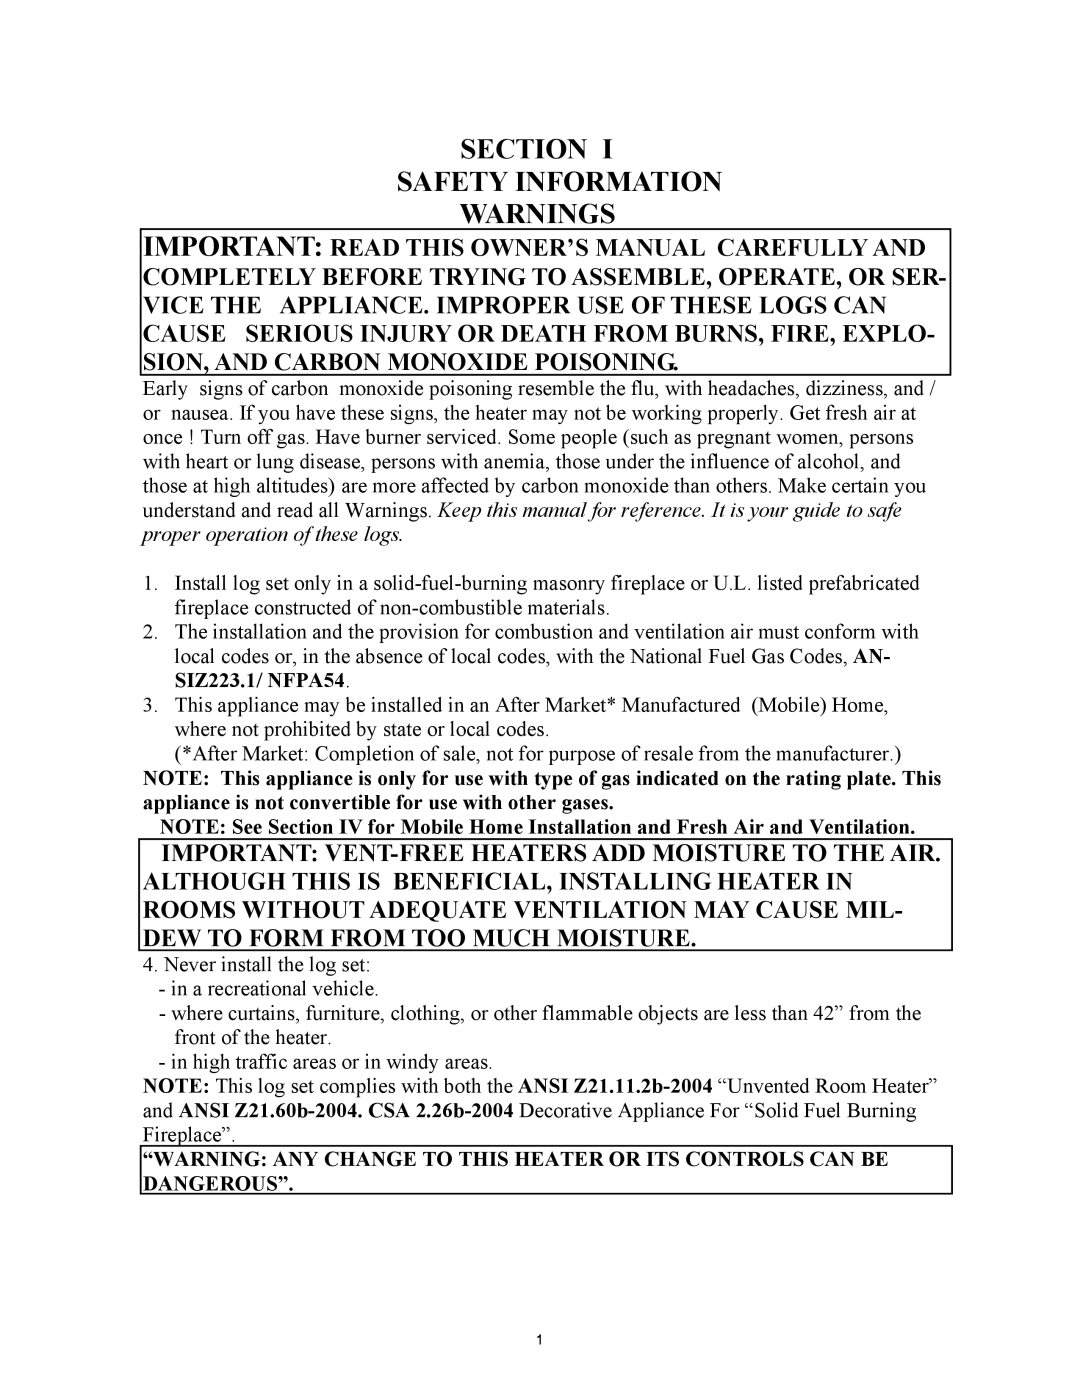 New Buck Corporation CR8T manual Section Safety Information Warnings 